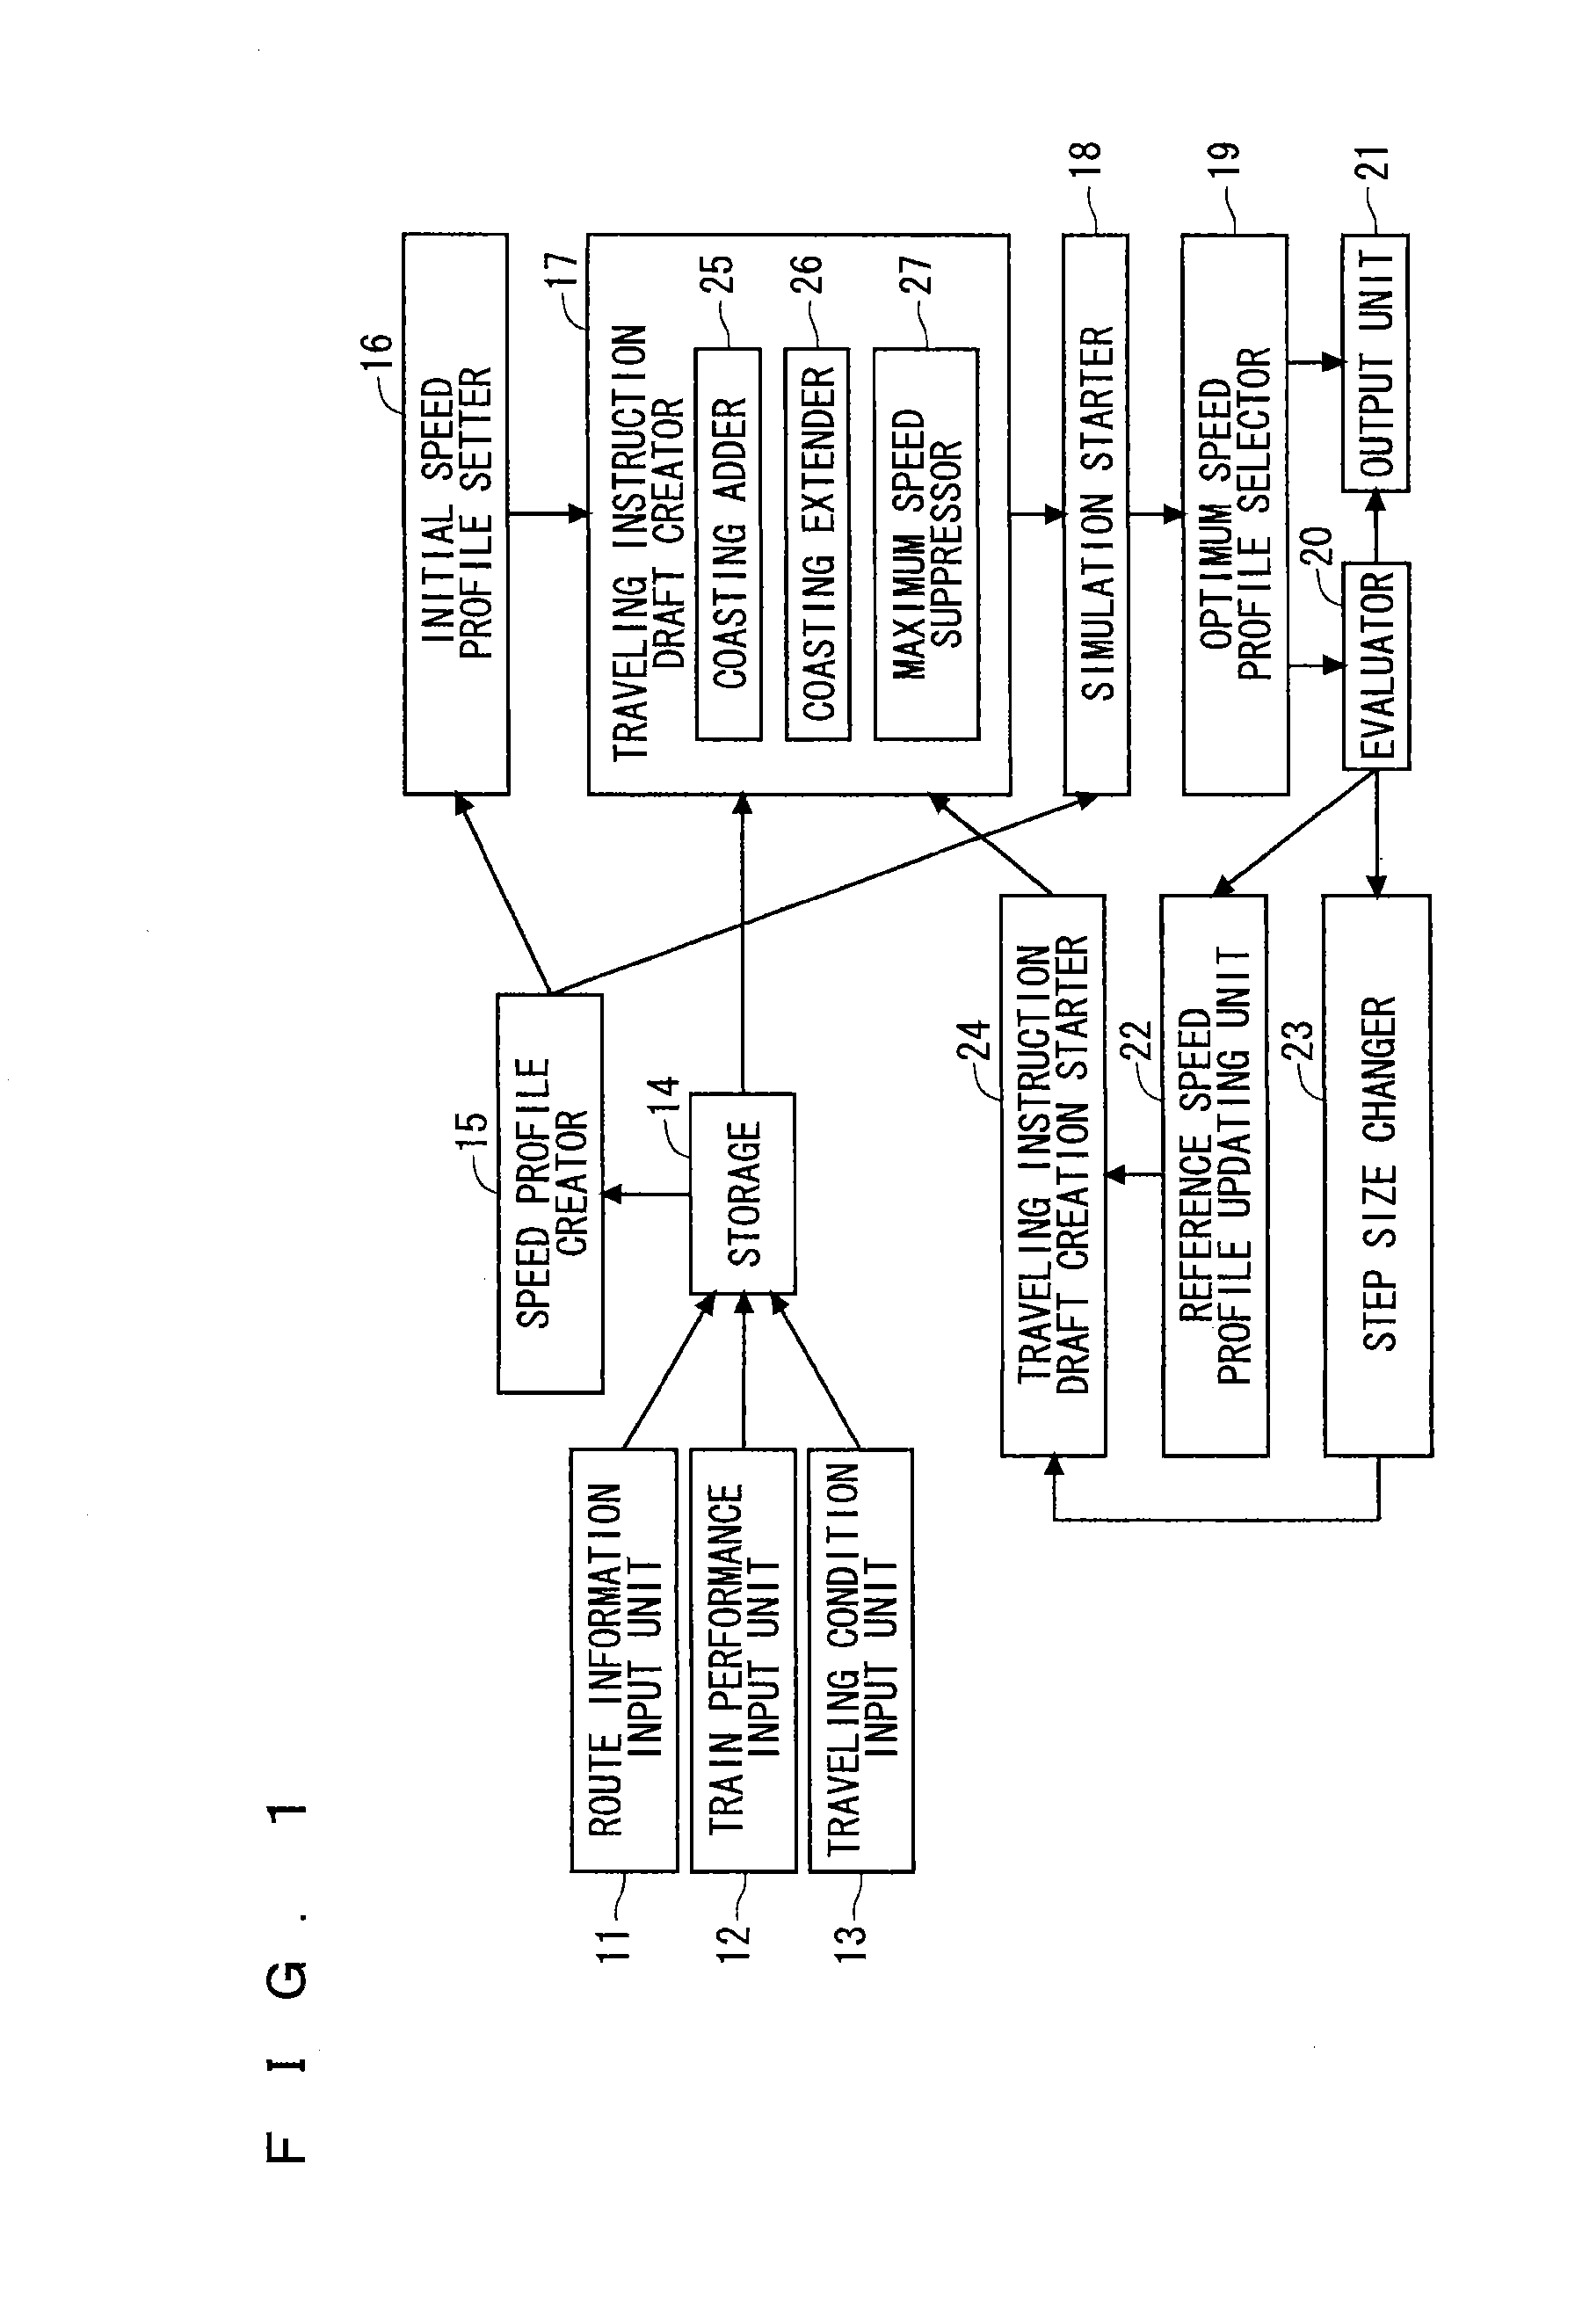 Speed profile creation device and automatic train operation apparatus